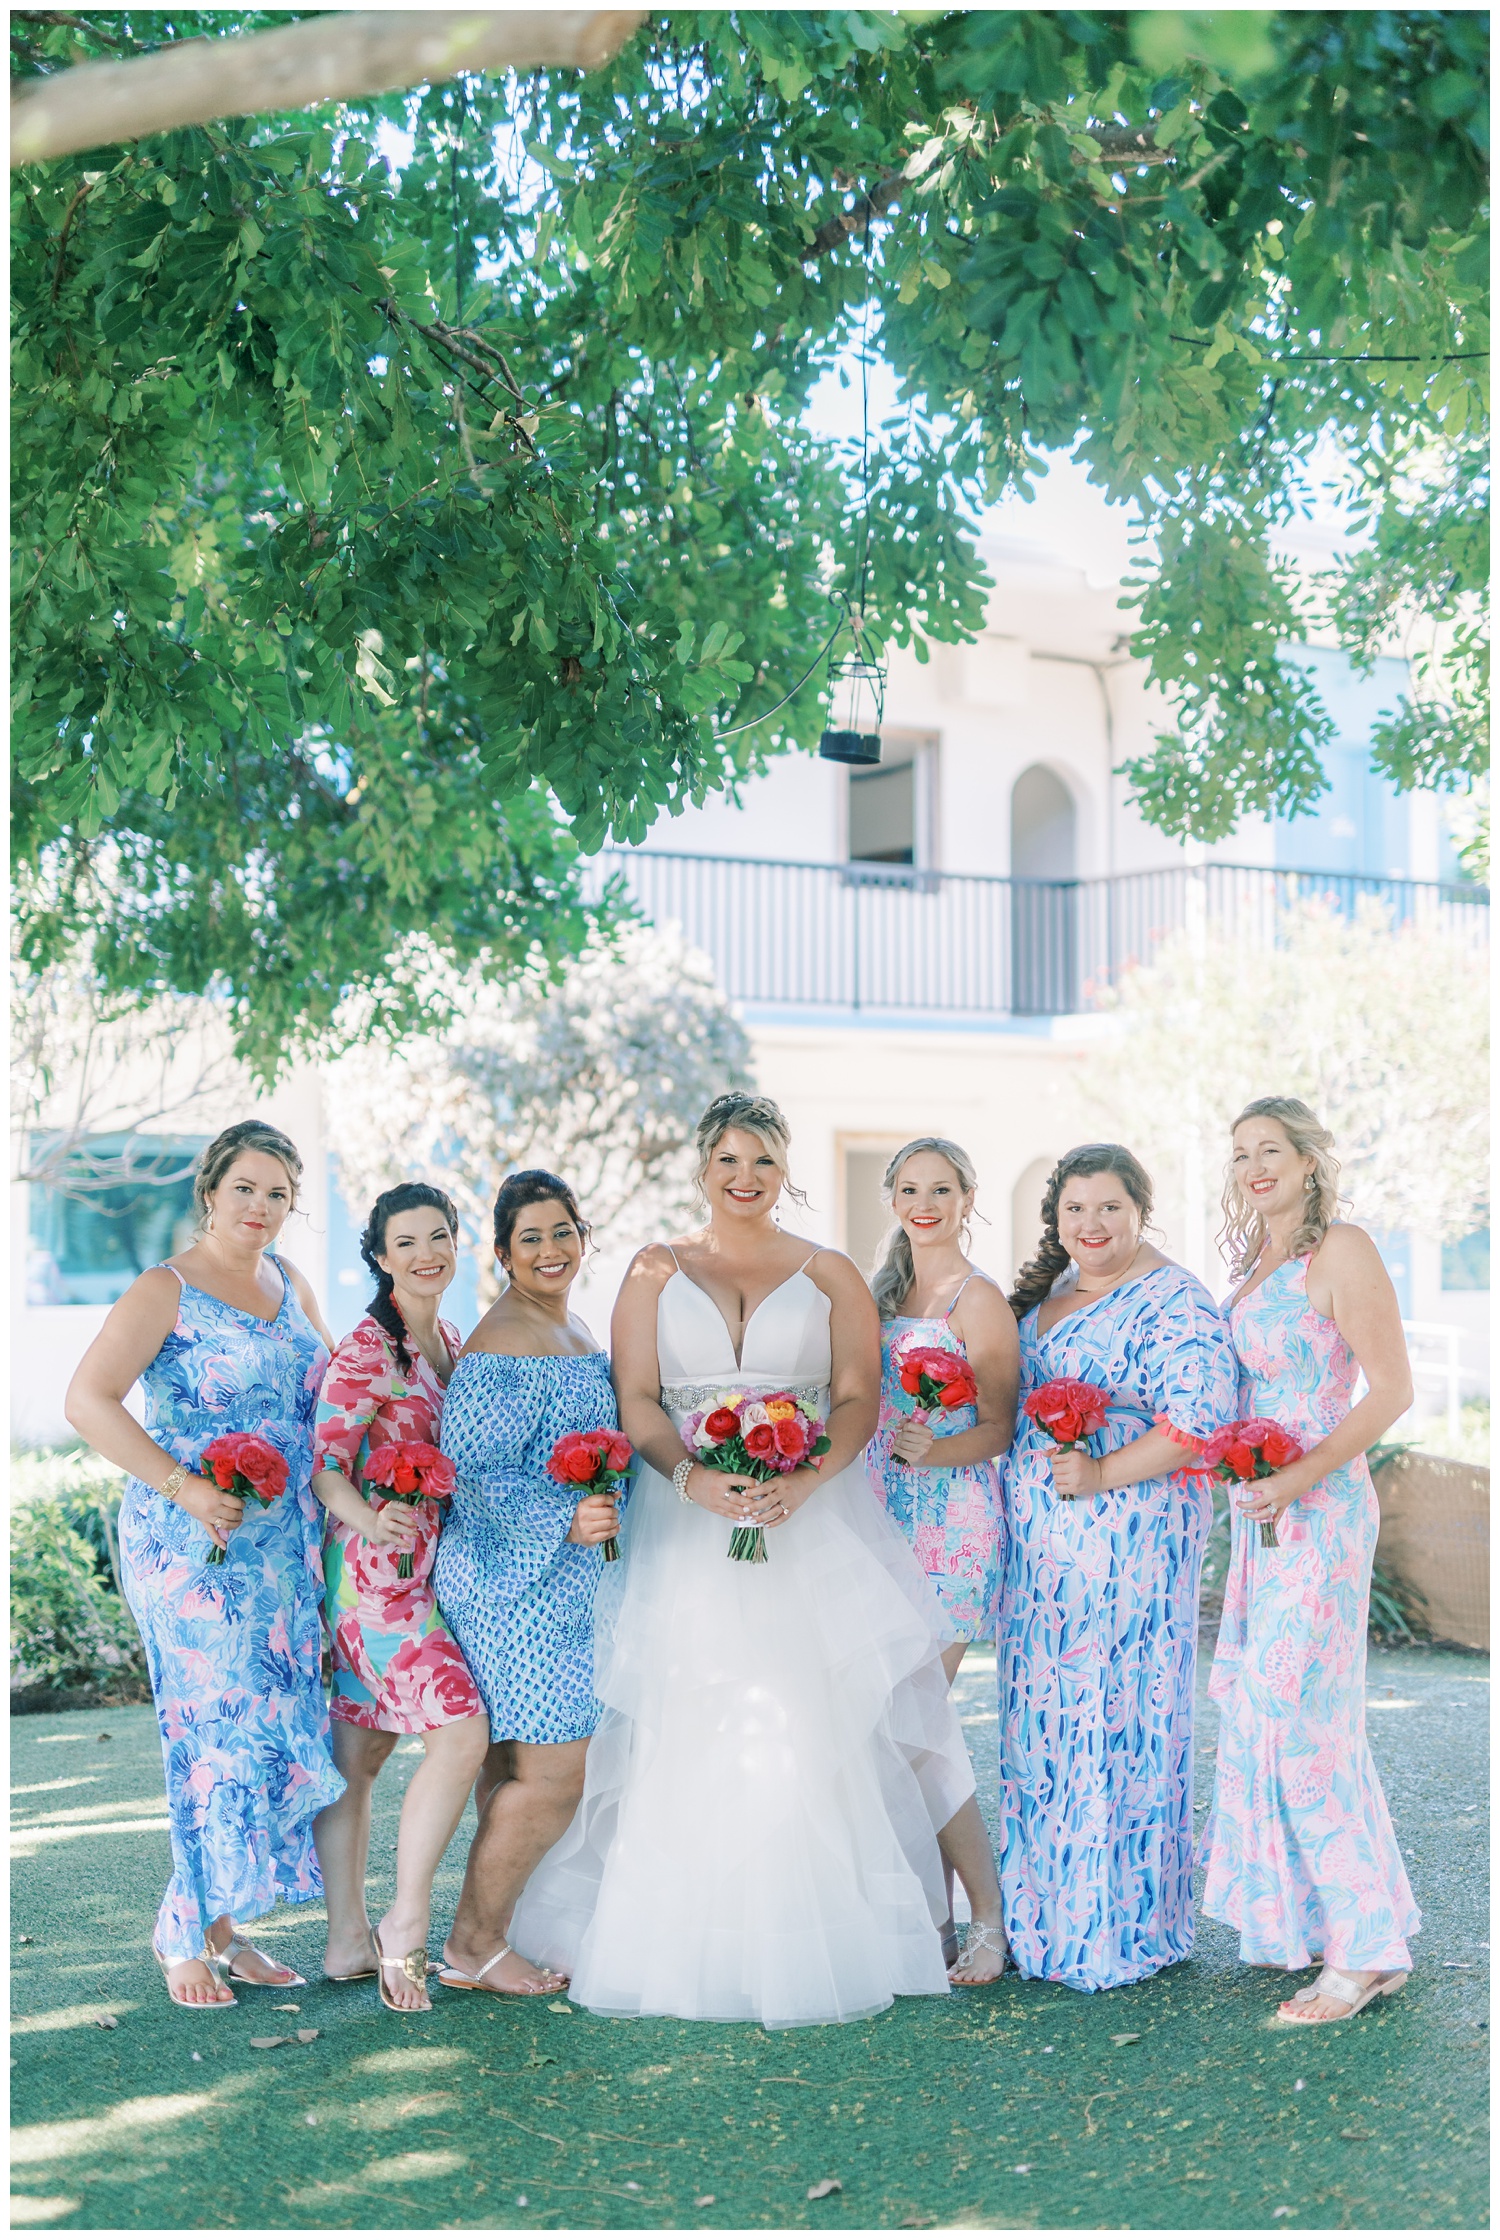 Bridesmaids wearing Lilly Pulitzer dresses